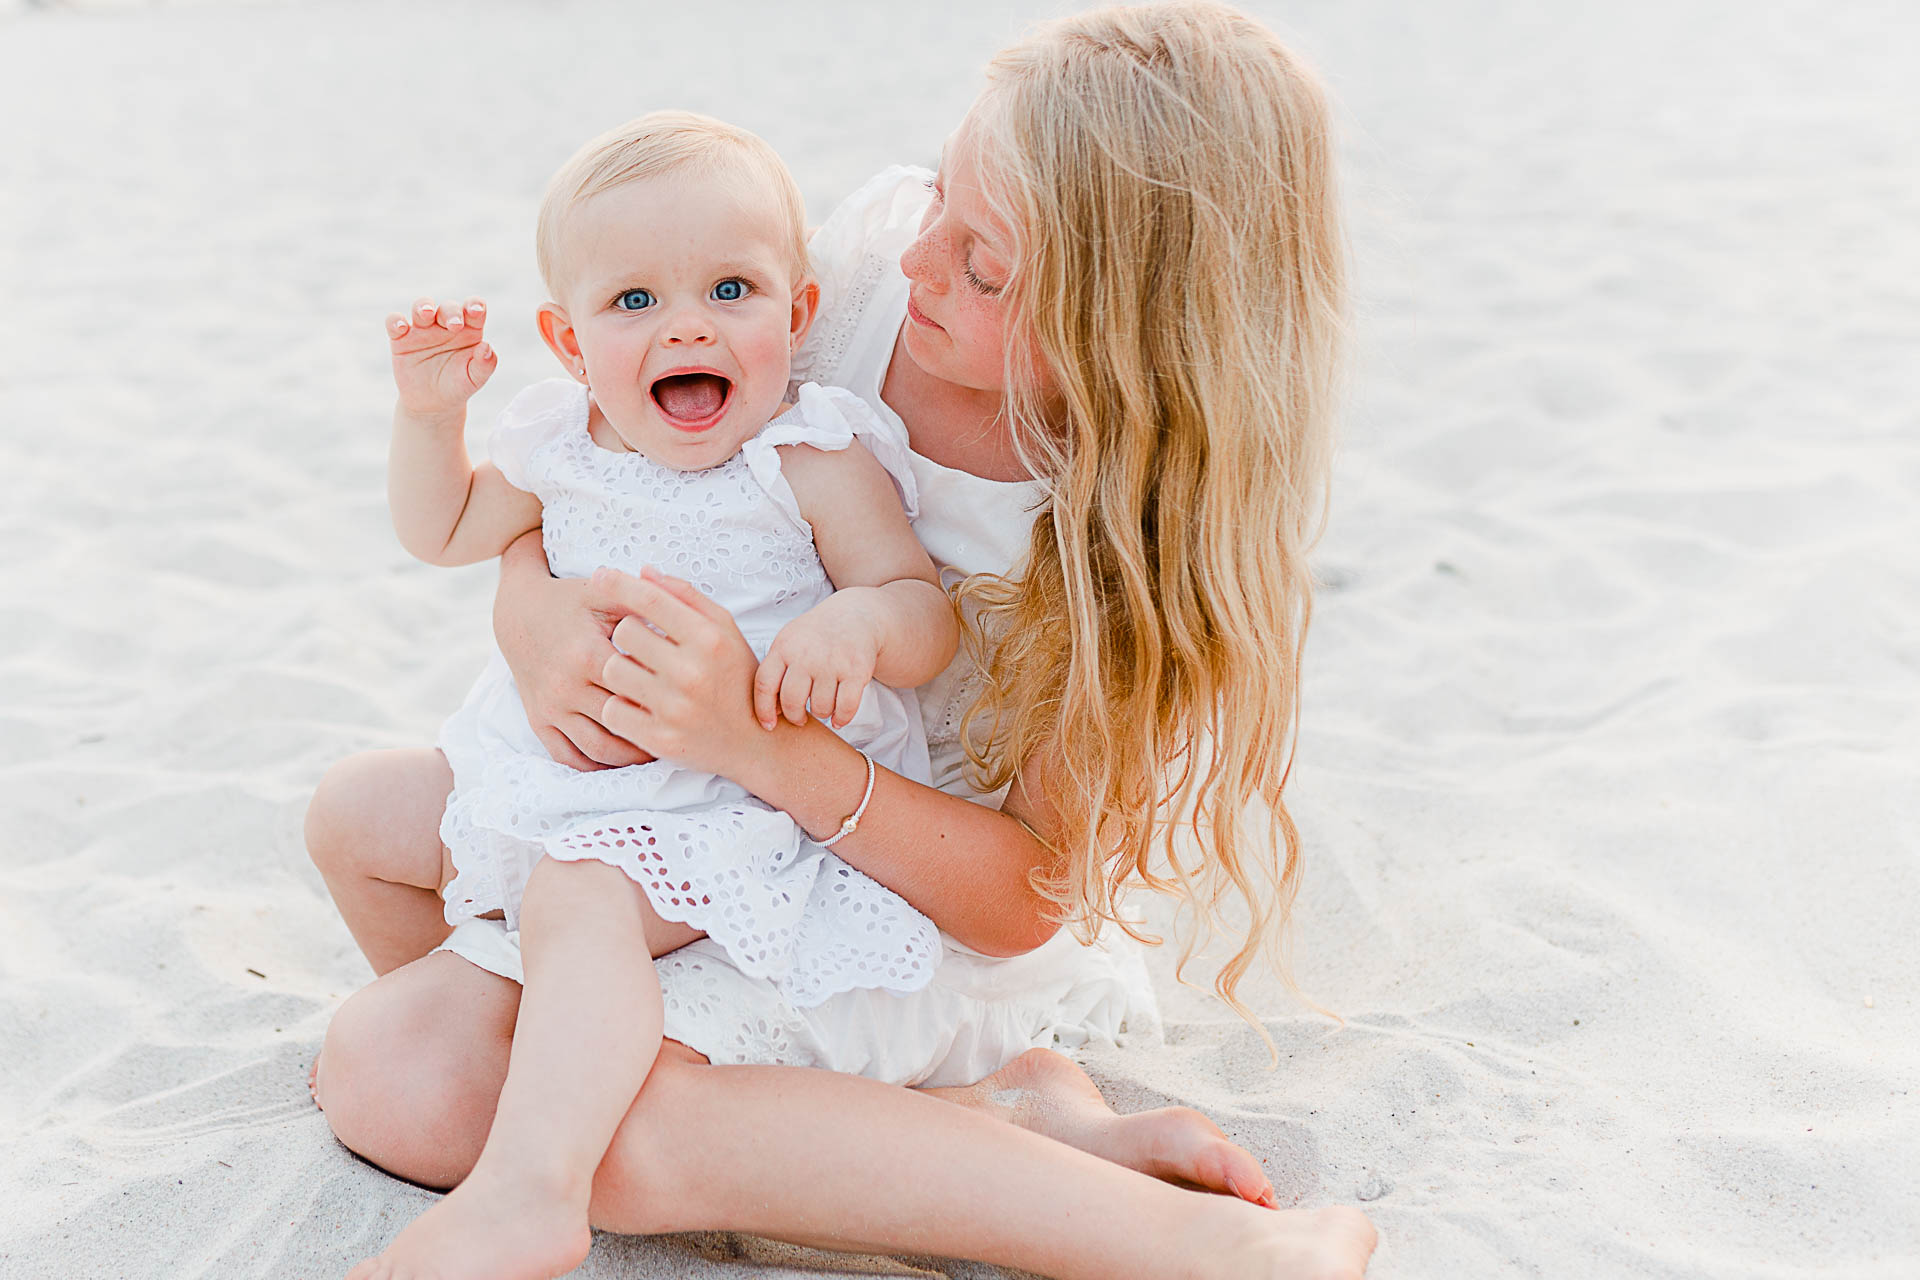 Photo by Cape Cod Family Photographer Christina Runnals | Big sister holding baby sister on beach wearing white